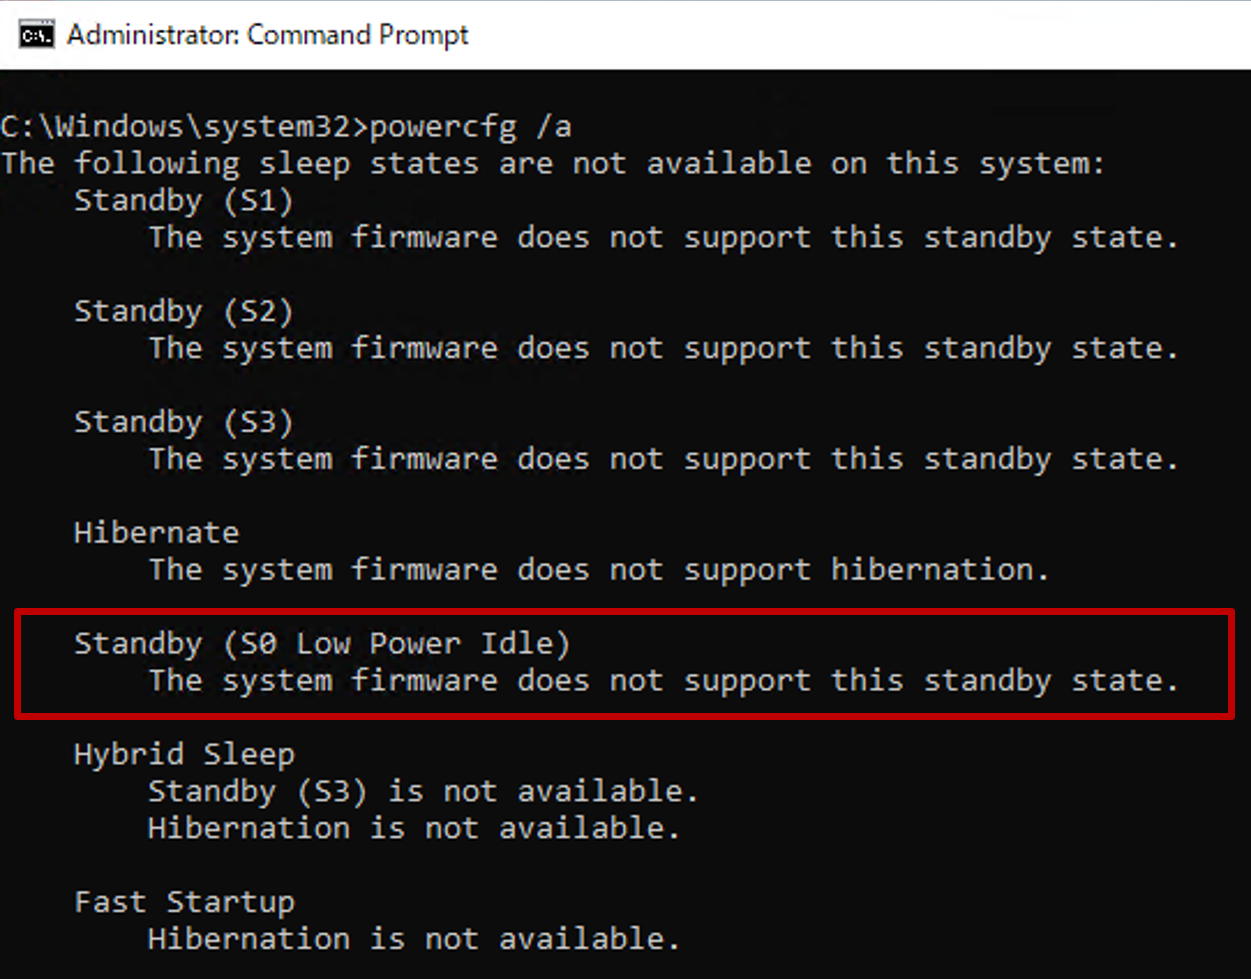 Screenshot of command prompt displaying output of powercfg command with Standby state S0 unavailable.